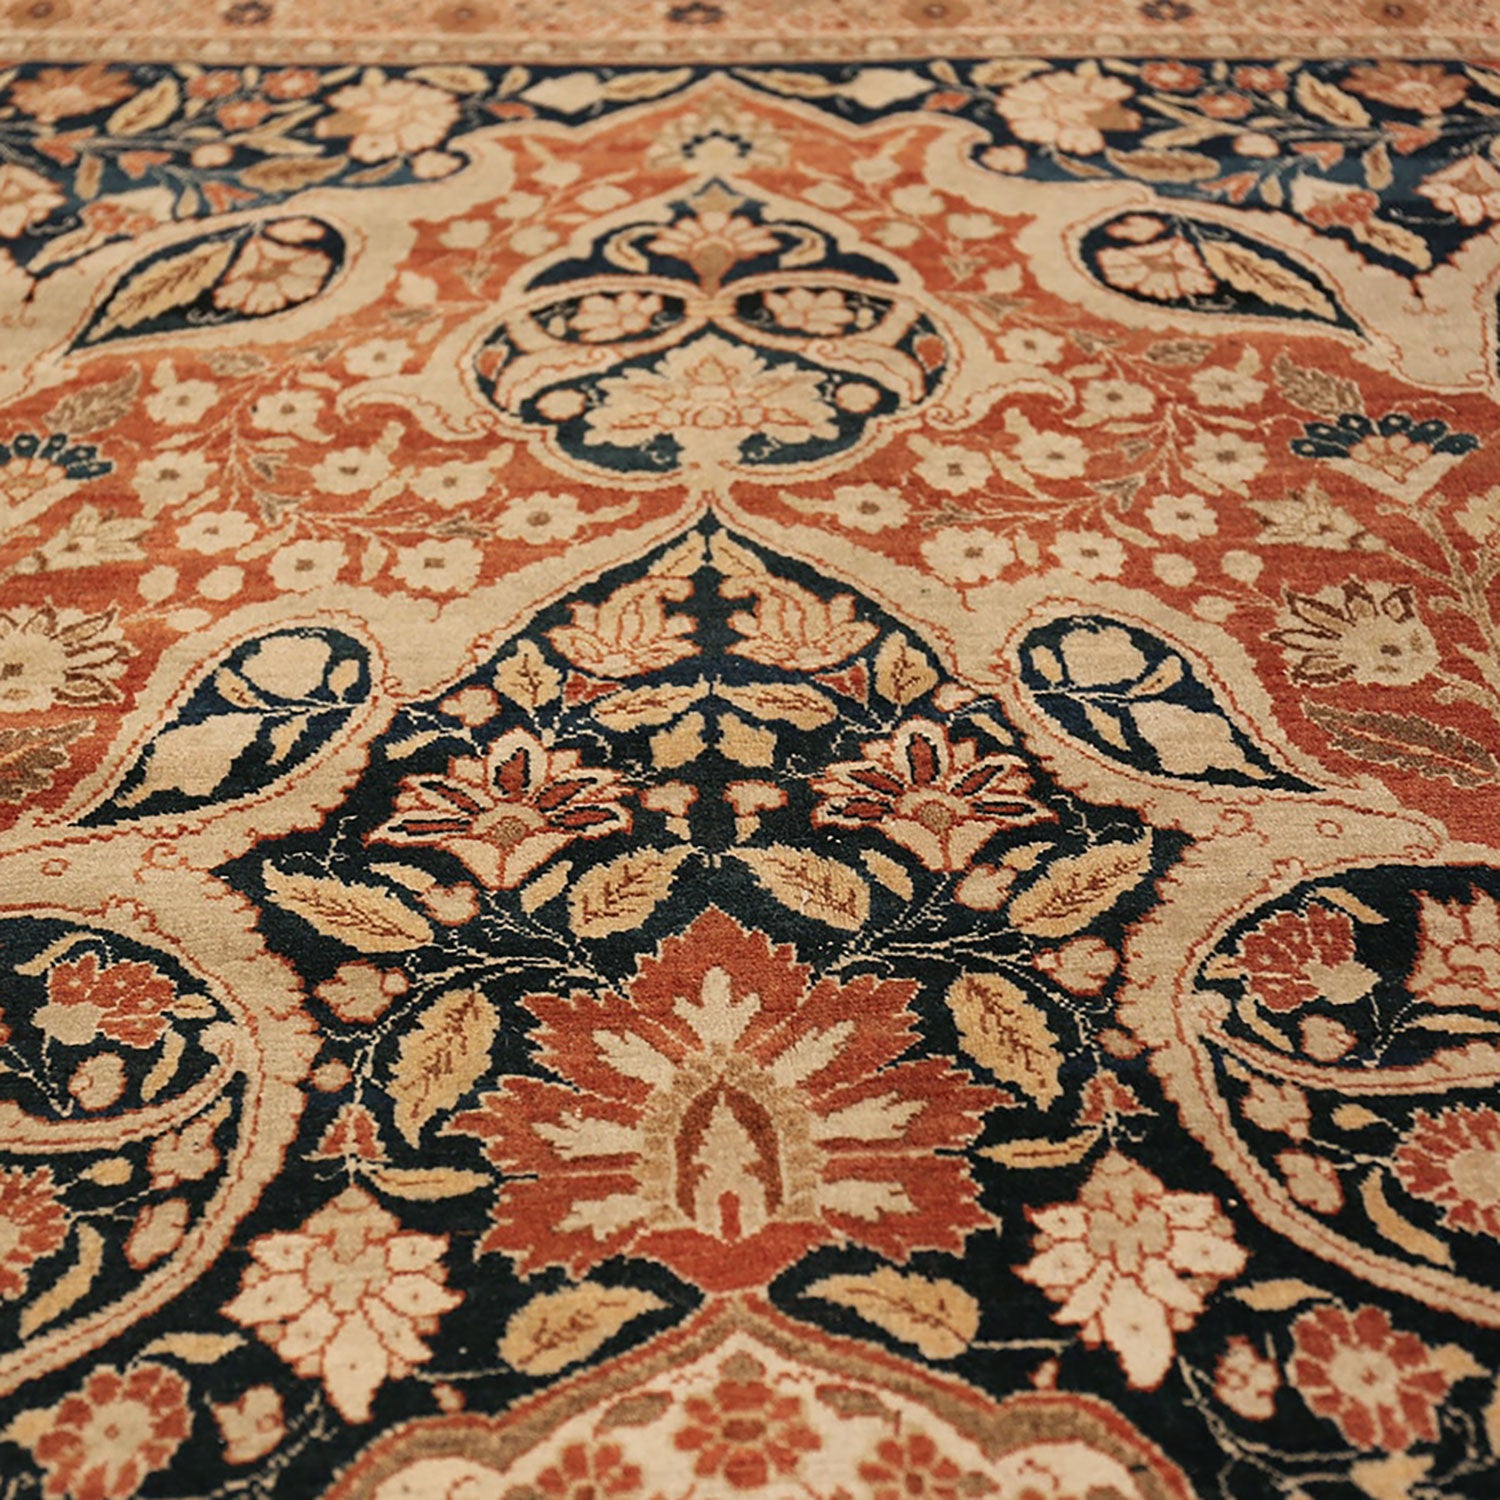 Close-up of a traditional ornate carpet in warm tones.